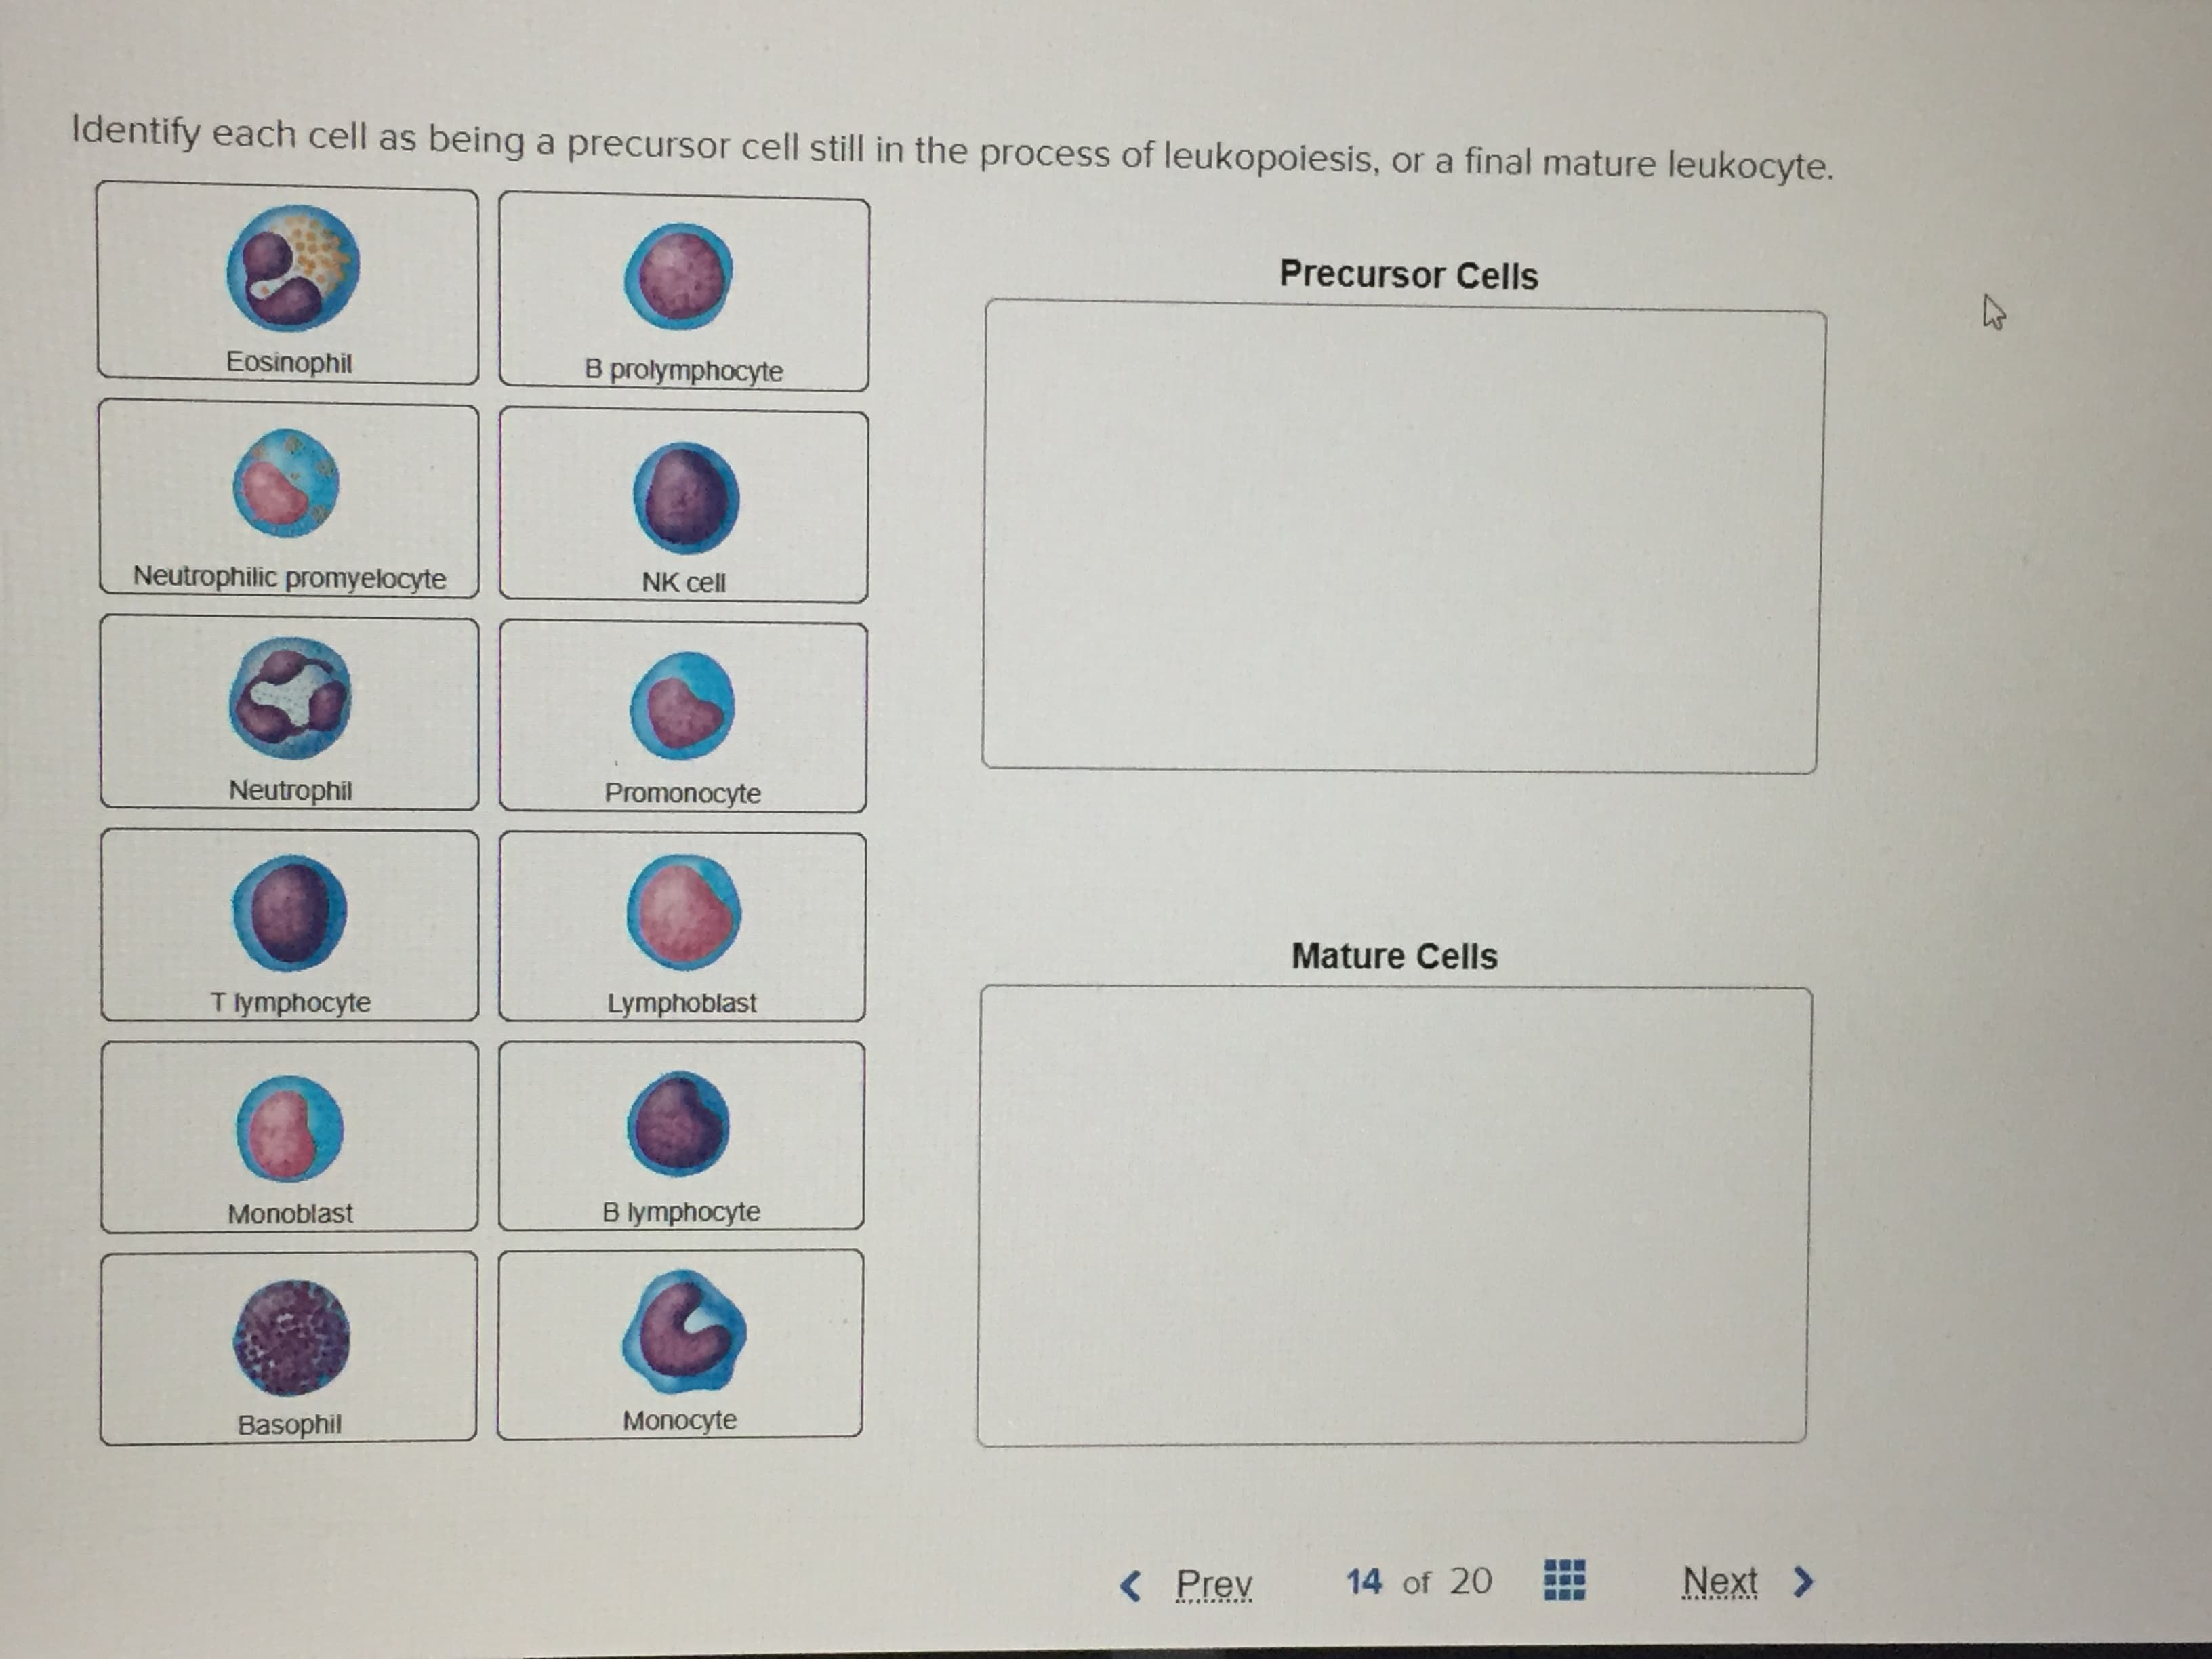 Identify each cell as being a precursor cell still in the process of leukopoiesis, or a final mature leukocyte.
Precursor Cells
Eosinophil
B prolymphocyte
Neutrophilic promyelocyte
NK cell
Neutrophil
Promonocyte
Mature Cells
T lymphocyte
Lymphoblast
B lymphocyte
Monoblast
Monocyte
Basophil
Next
14 of 20
( Prev
